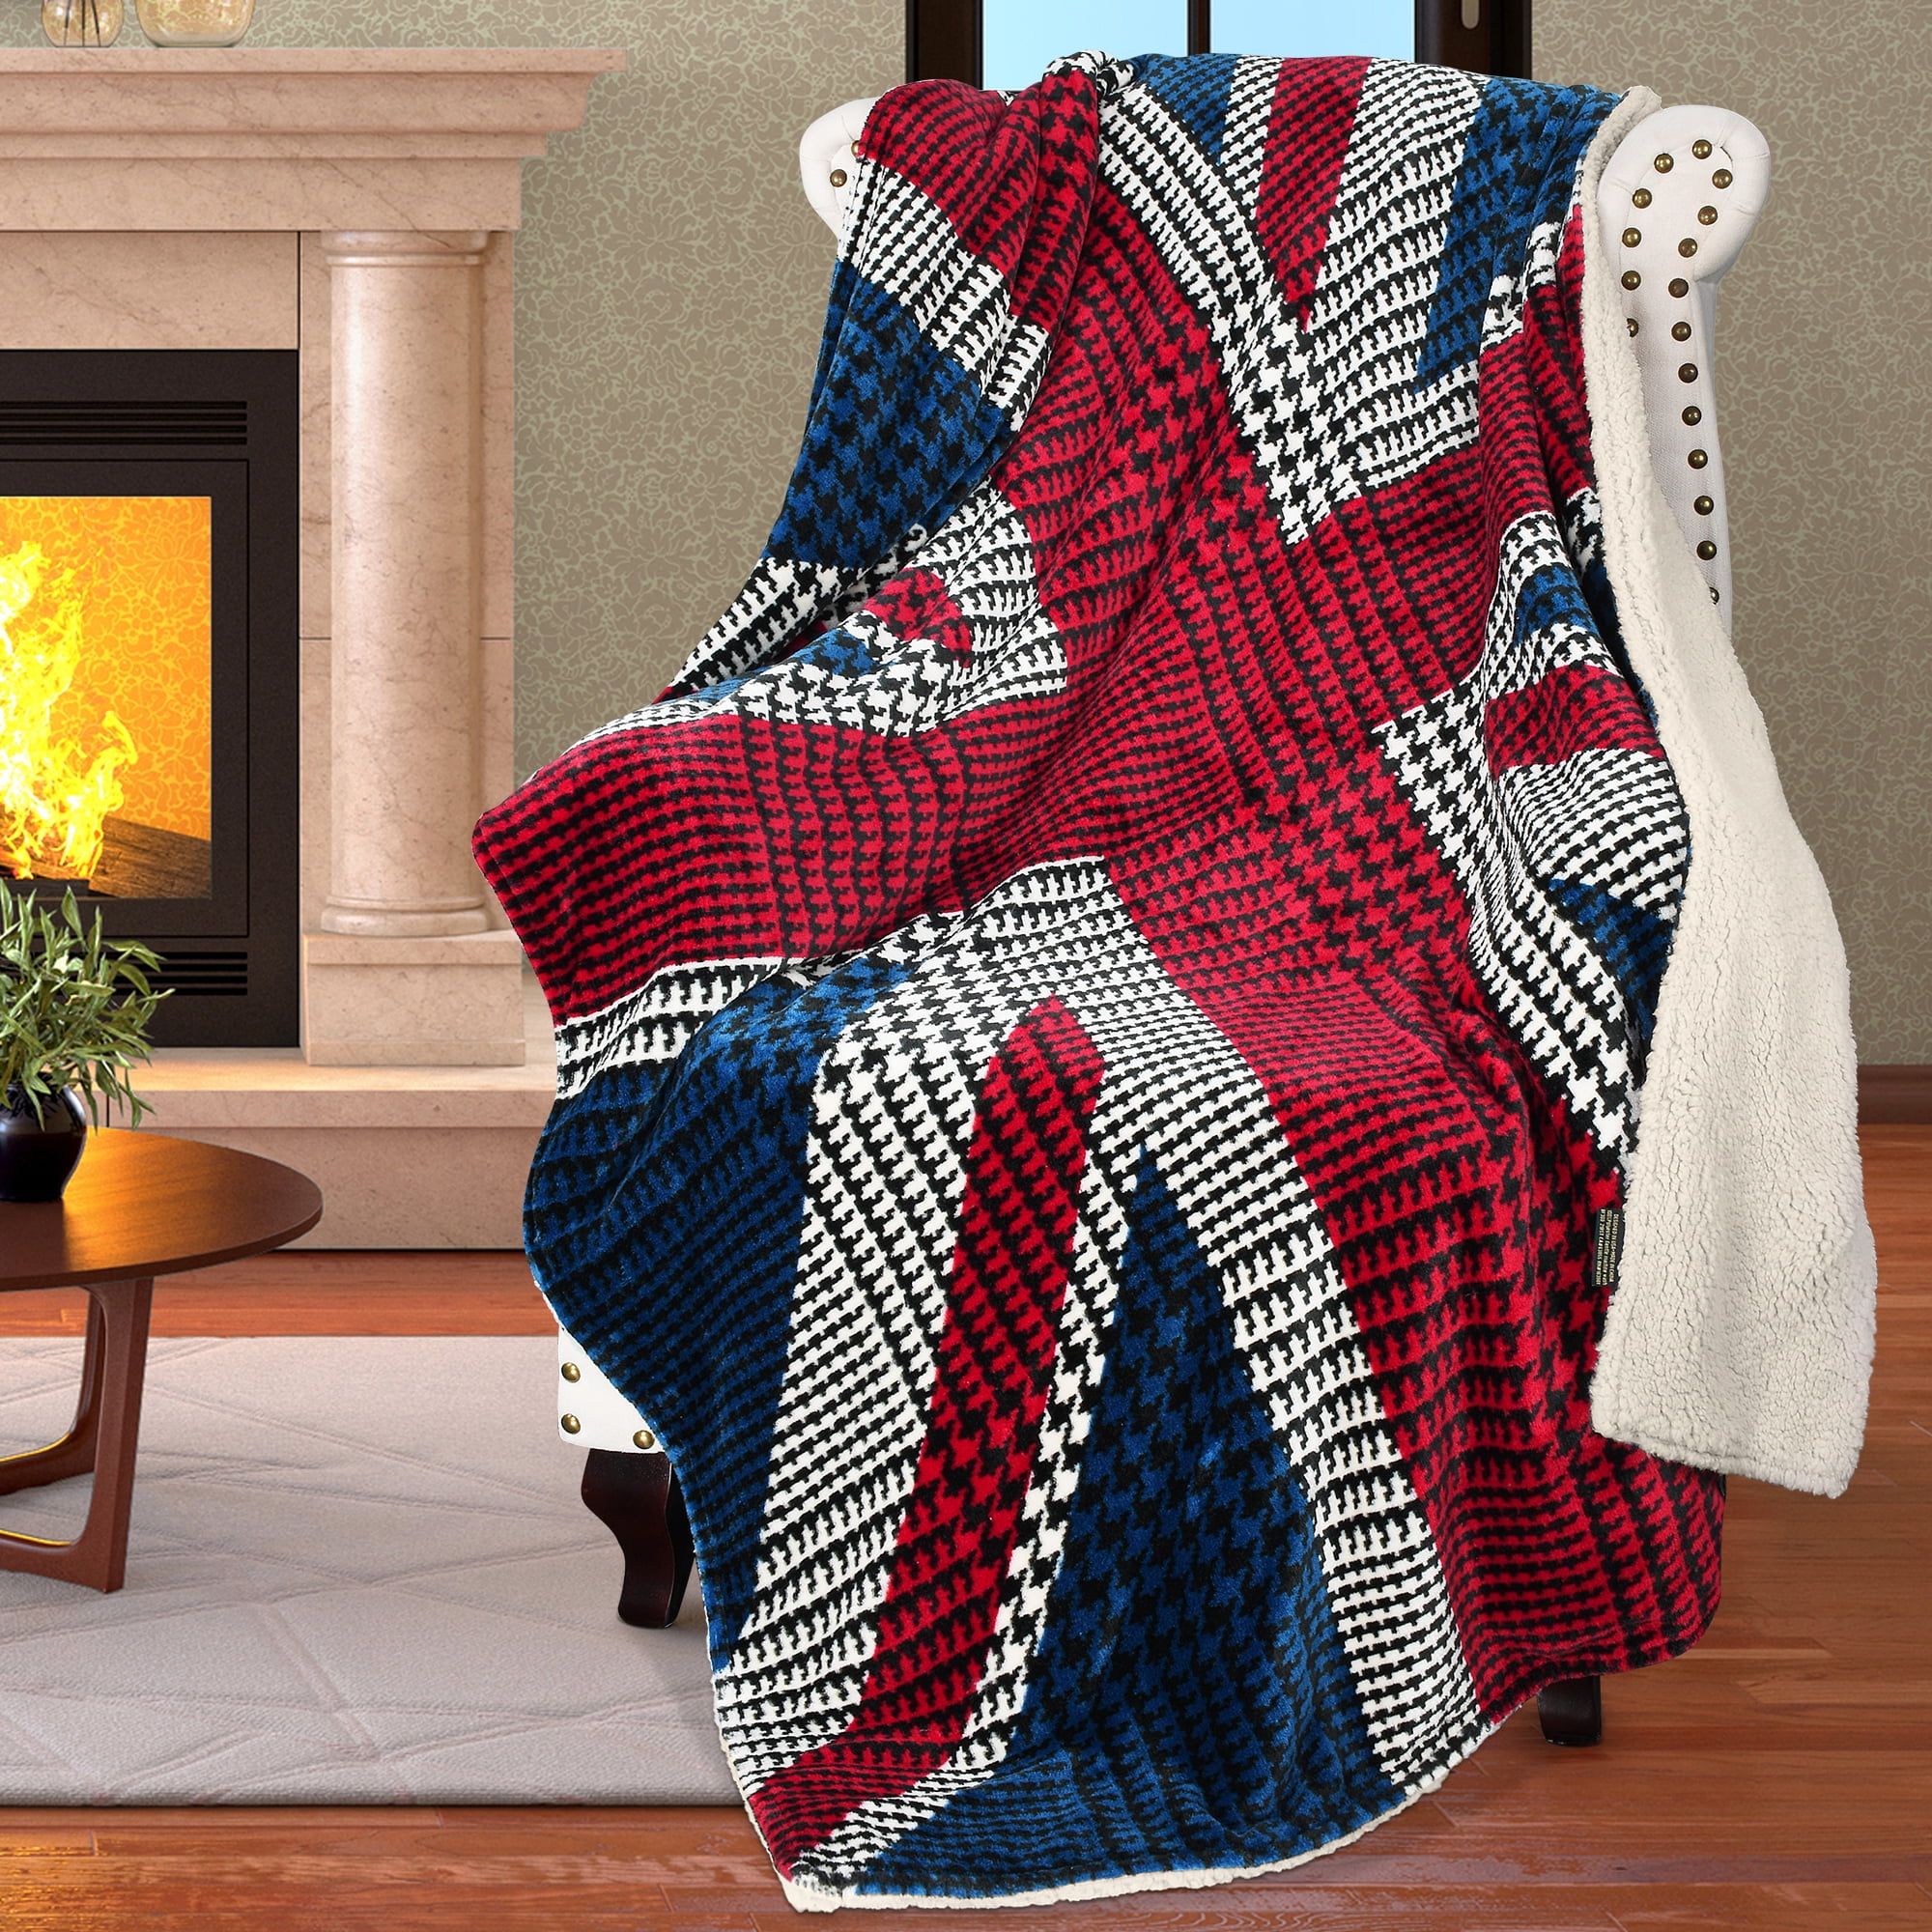 British American Flag Fleece Blanket Throw Super Soft Cozy Couch Blanket Lightweight Warm Bed Blanket for Sofa Bed Travel Camping